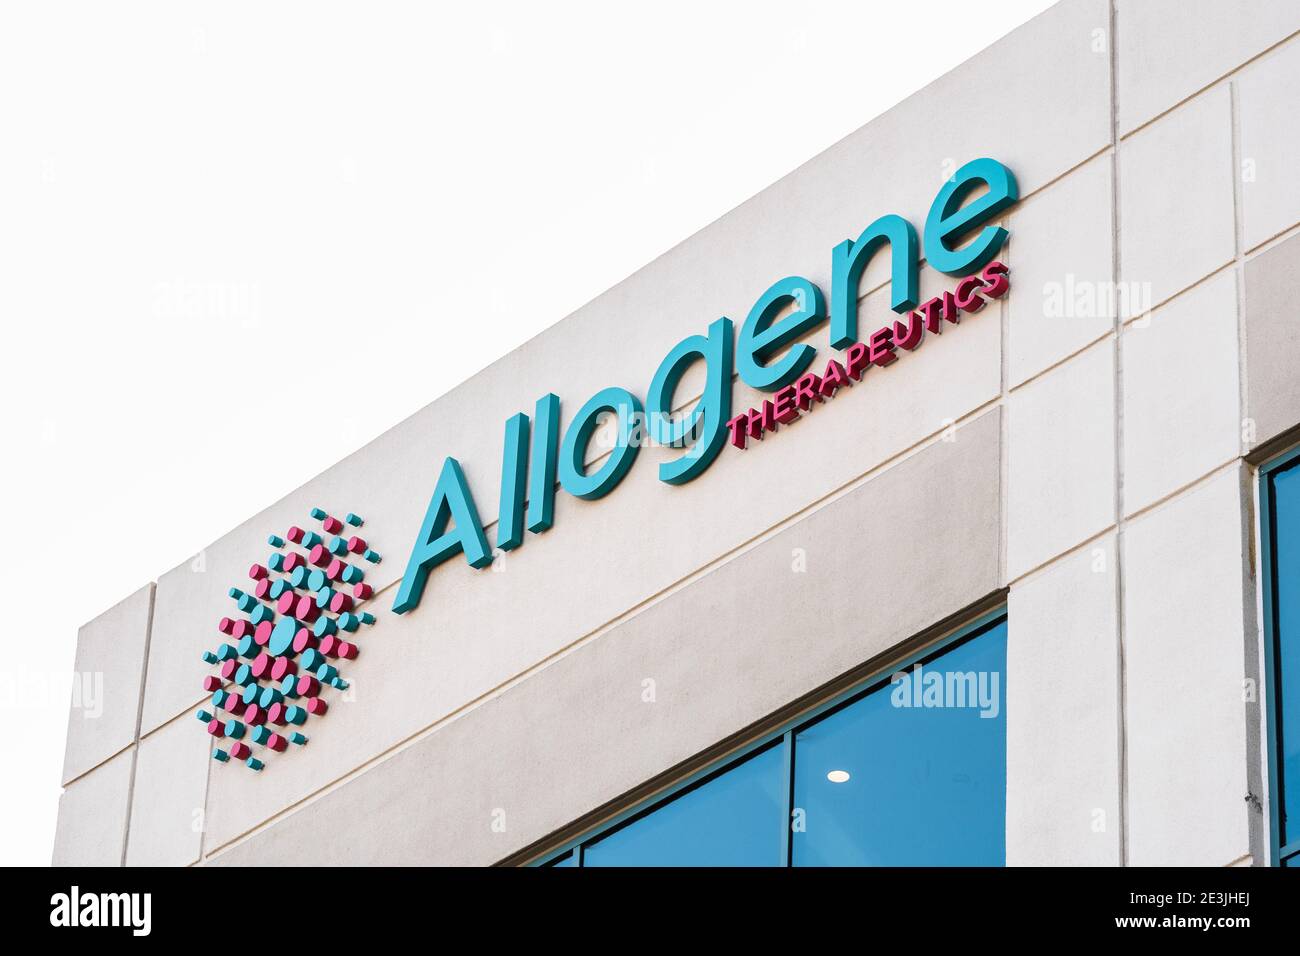 Sep 21, 2020 South San Francisco / CA / USA - Allogene sign at their headquarters in Silicon Valley; Allogene Therapeutics, Inc. operates as a biotech Stock Photo